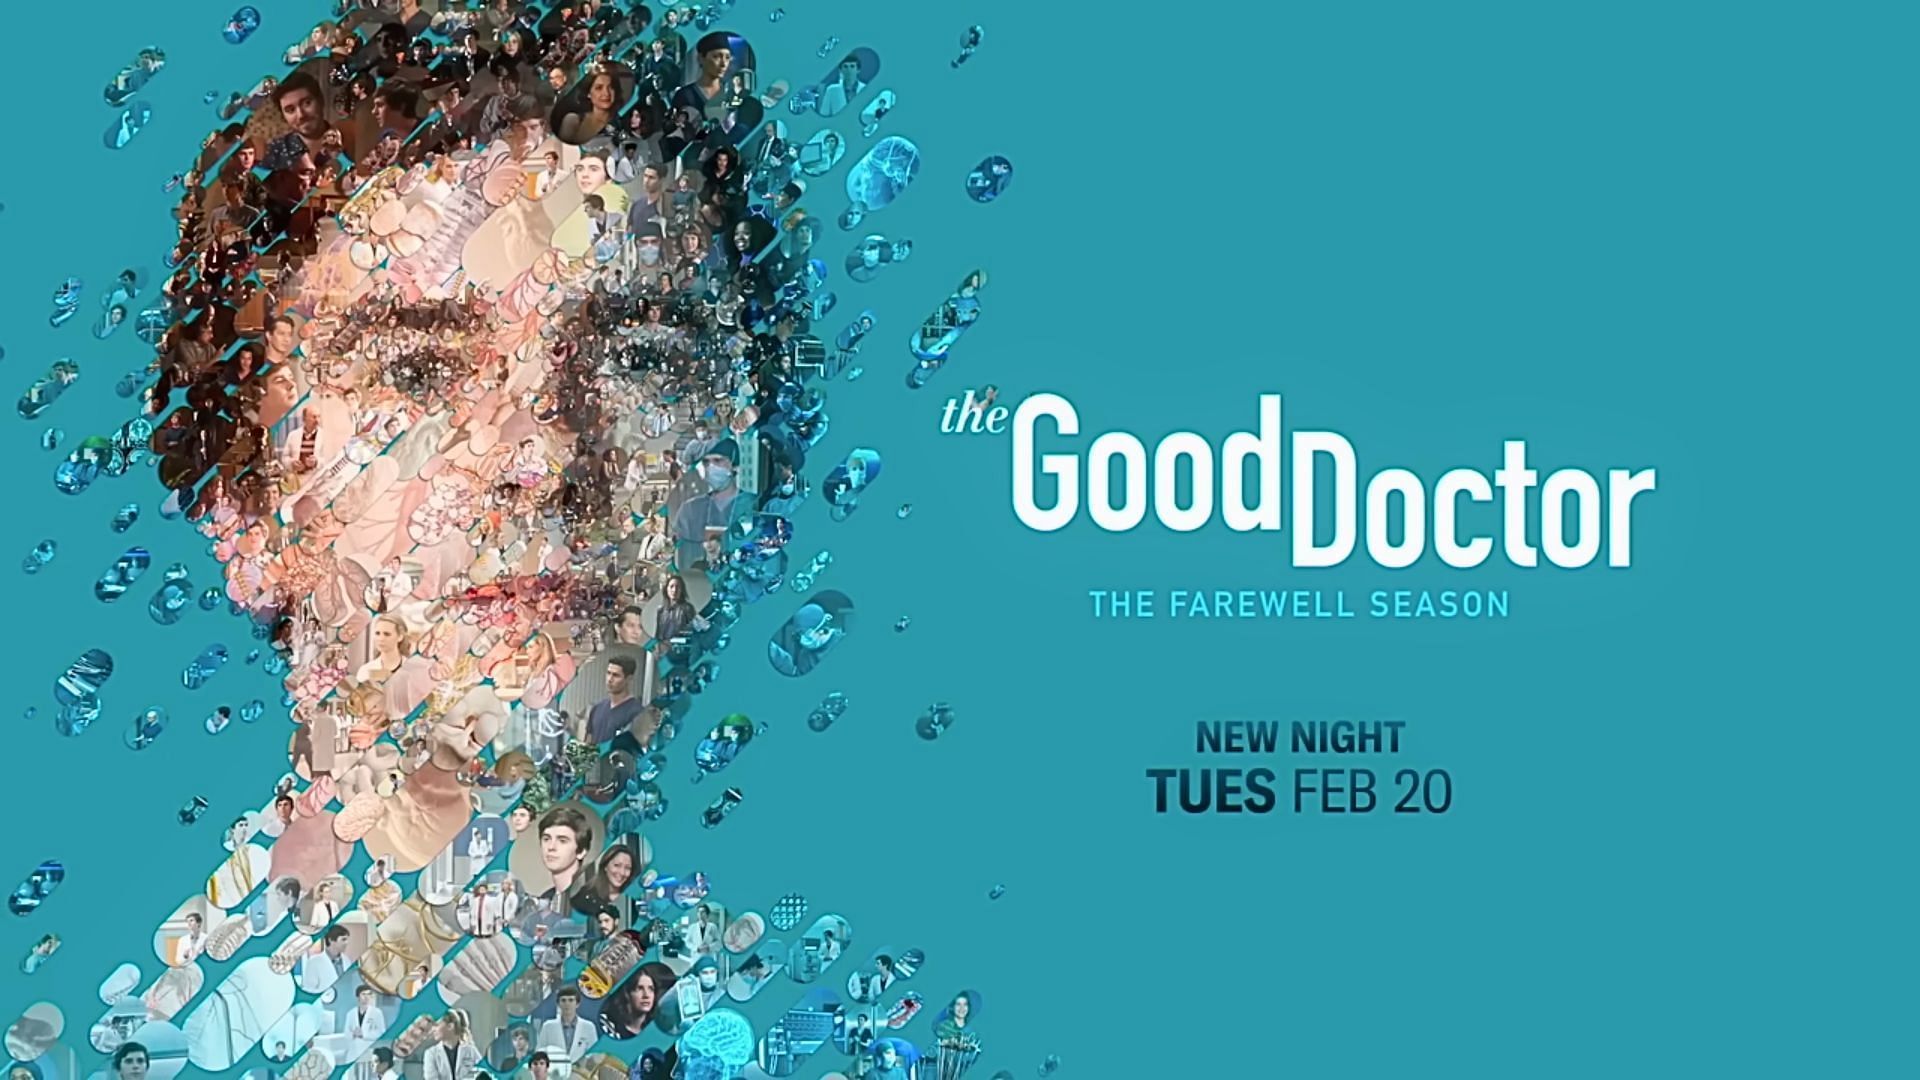 The Good Doctor season 7 episode 1 is titled 